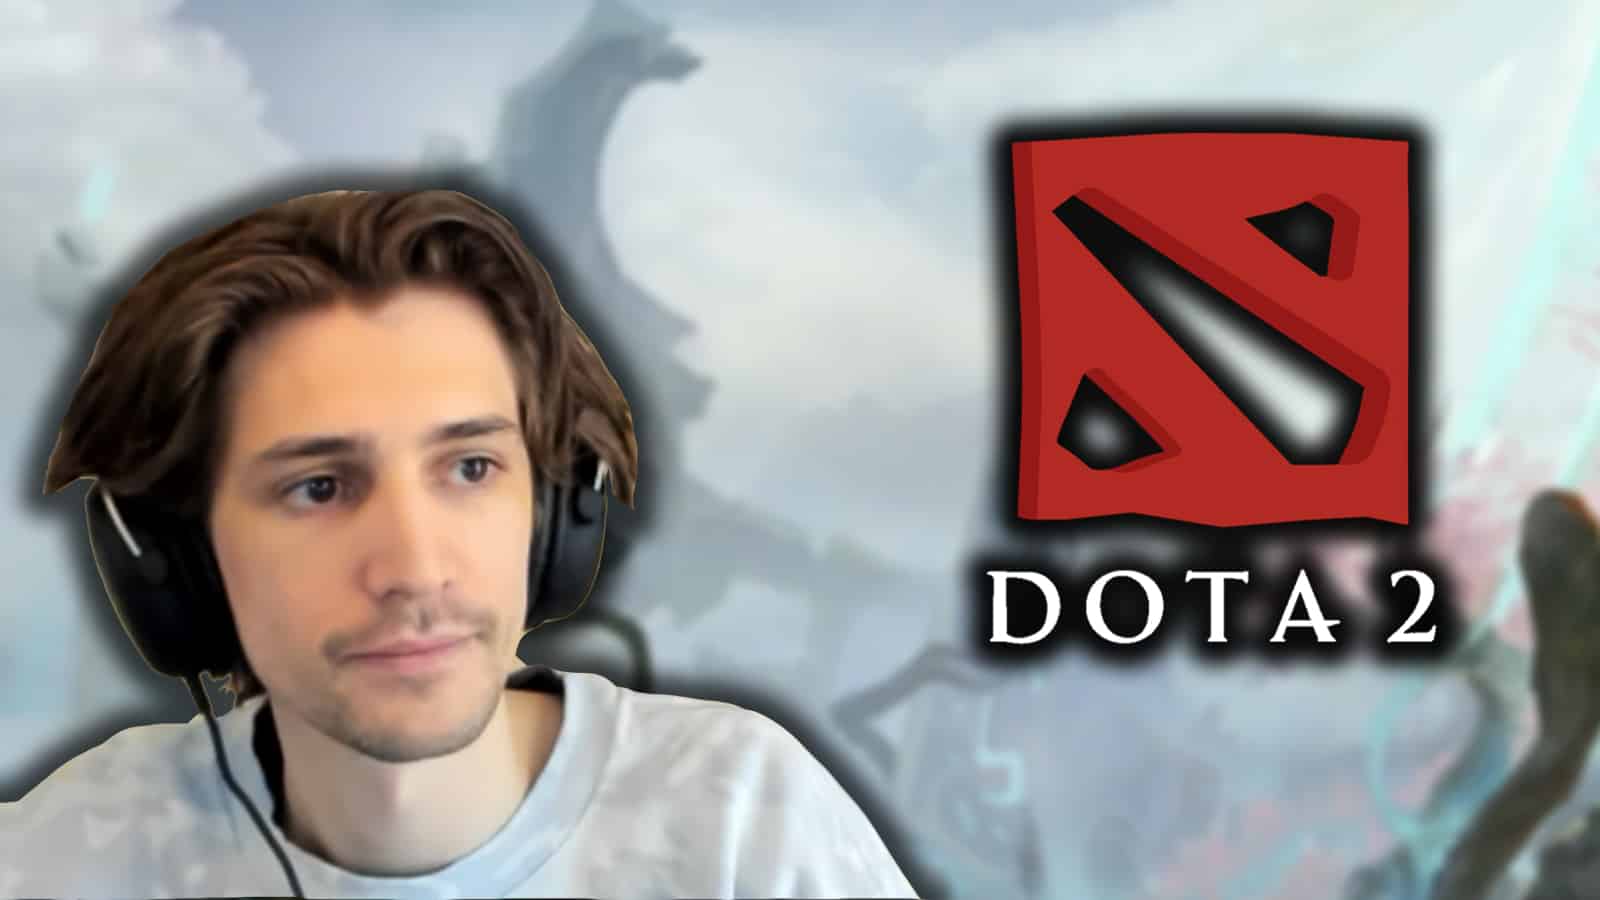 An image of streamer xQc and the game Dota 2.